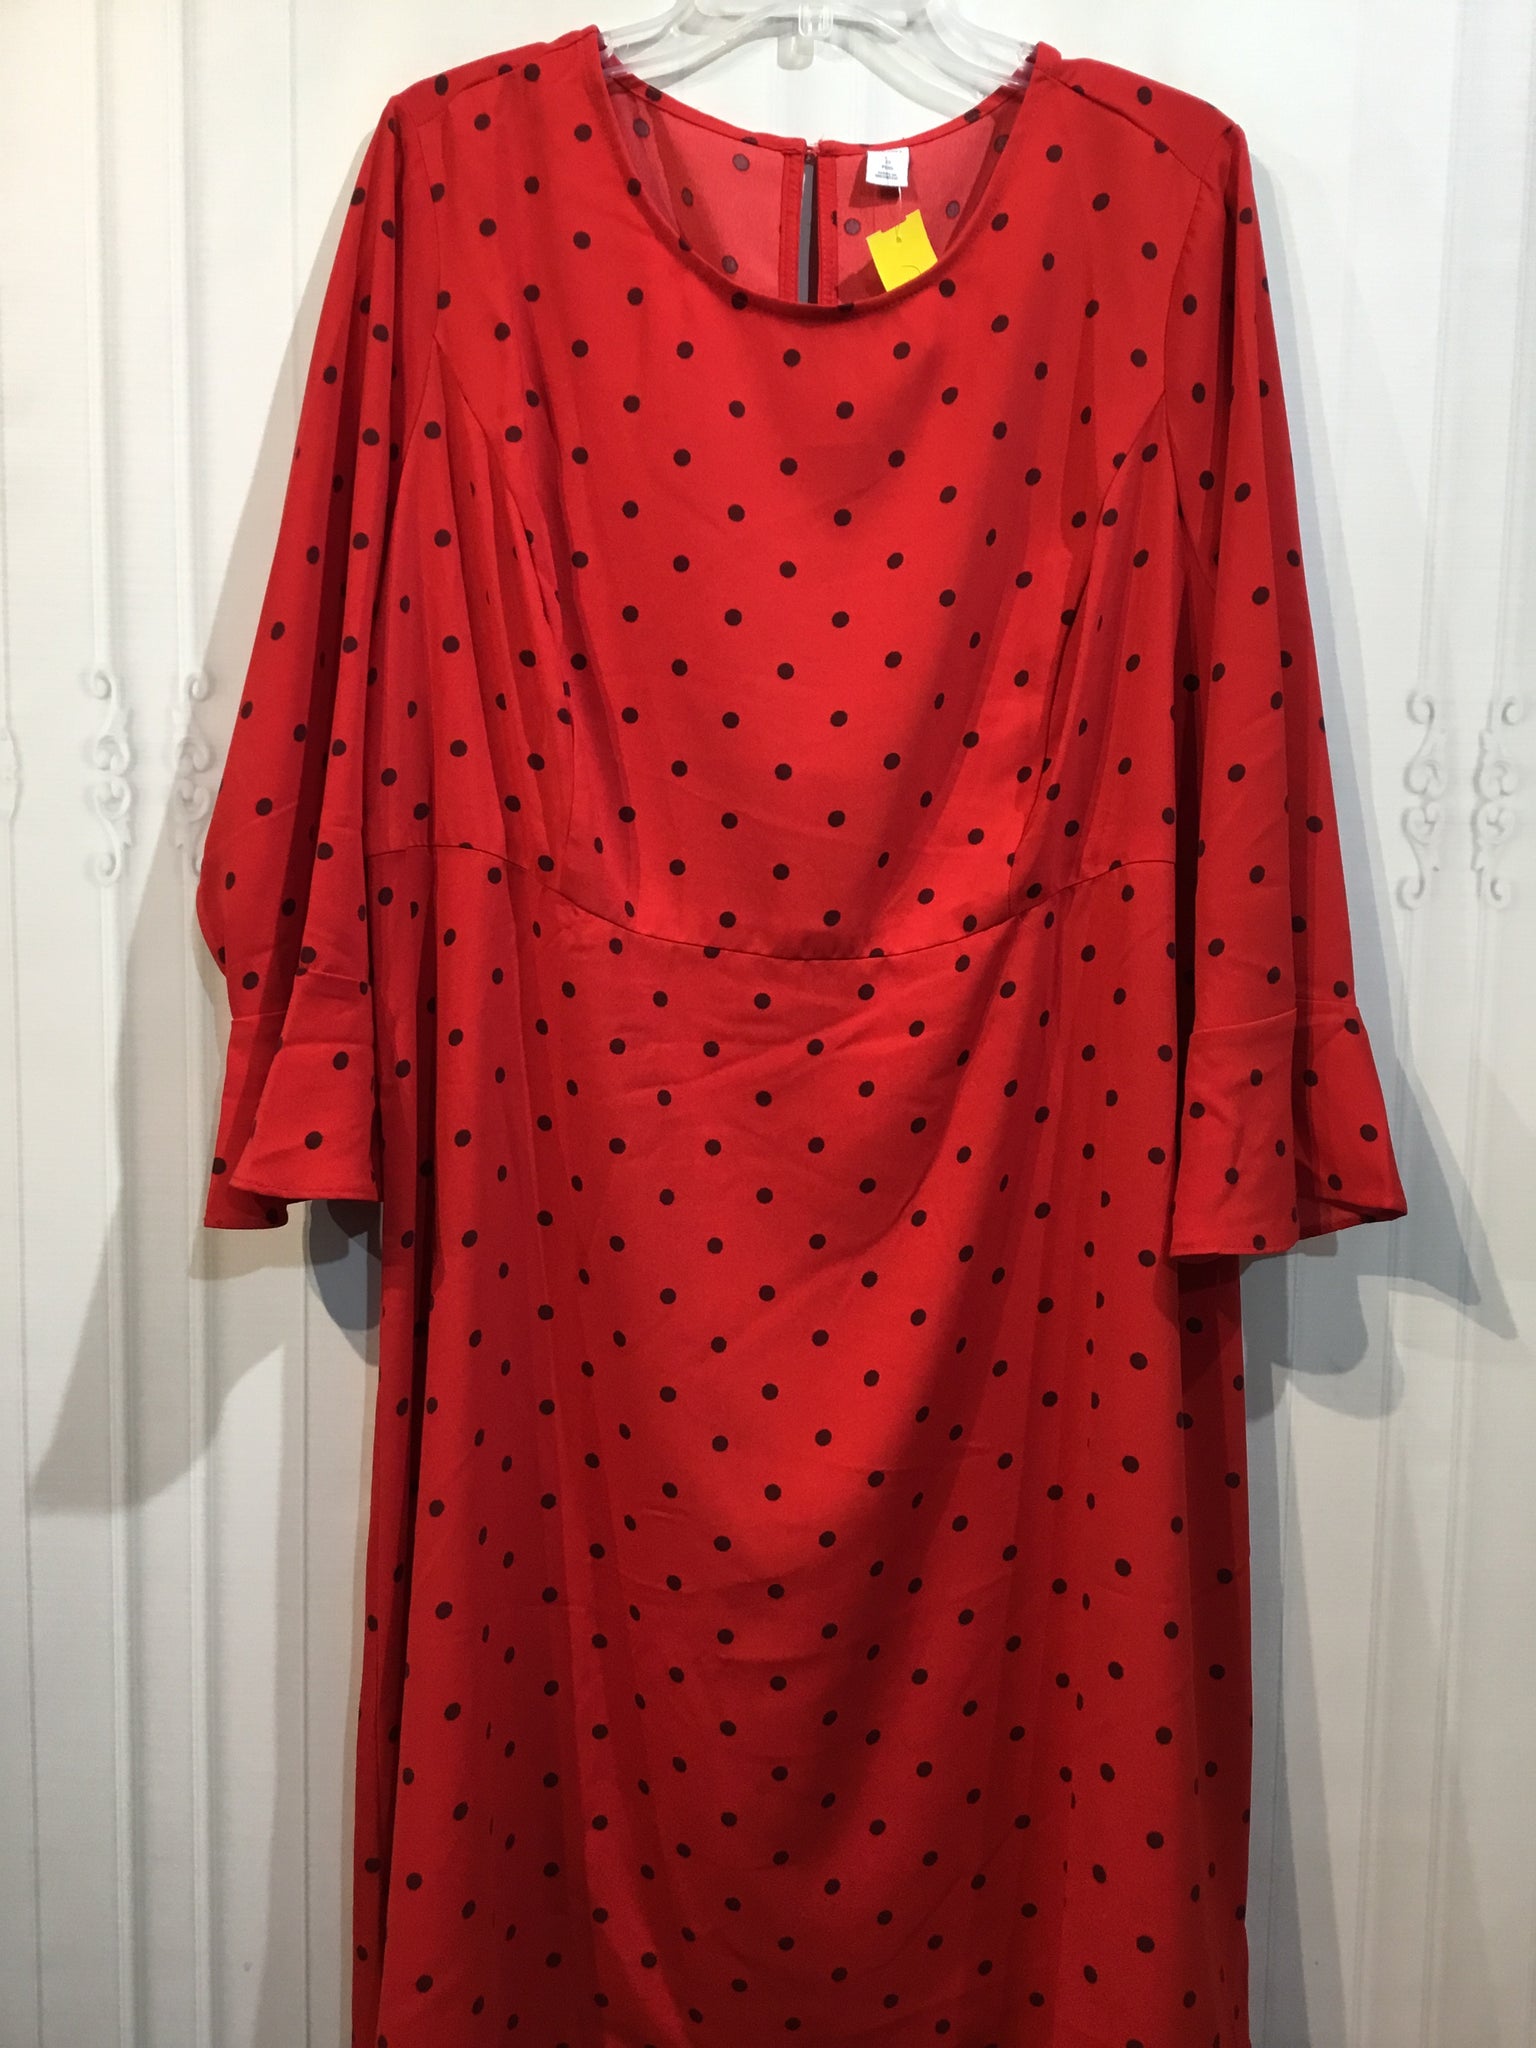 Old Navy Size 2X/18-24 Red & Navy Dress